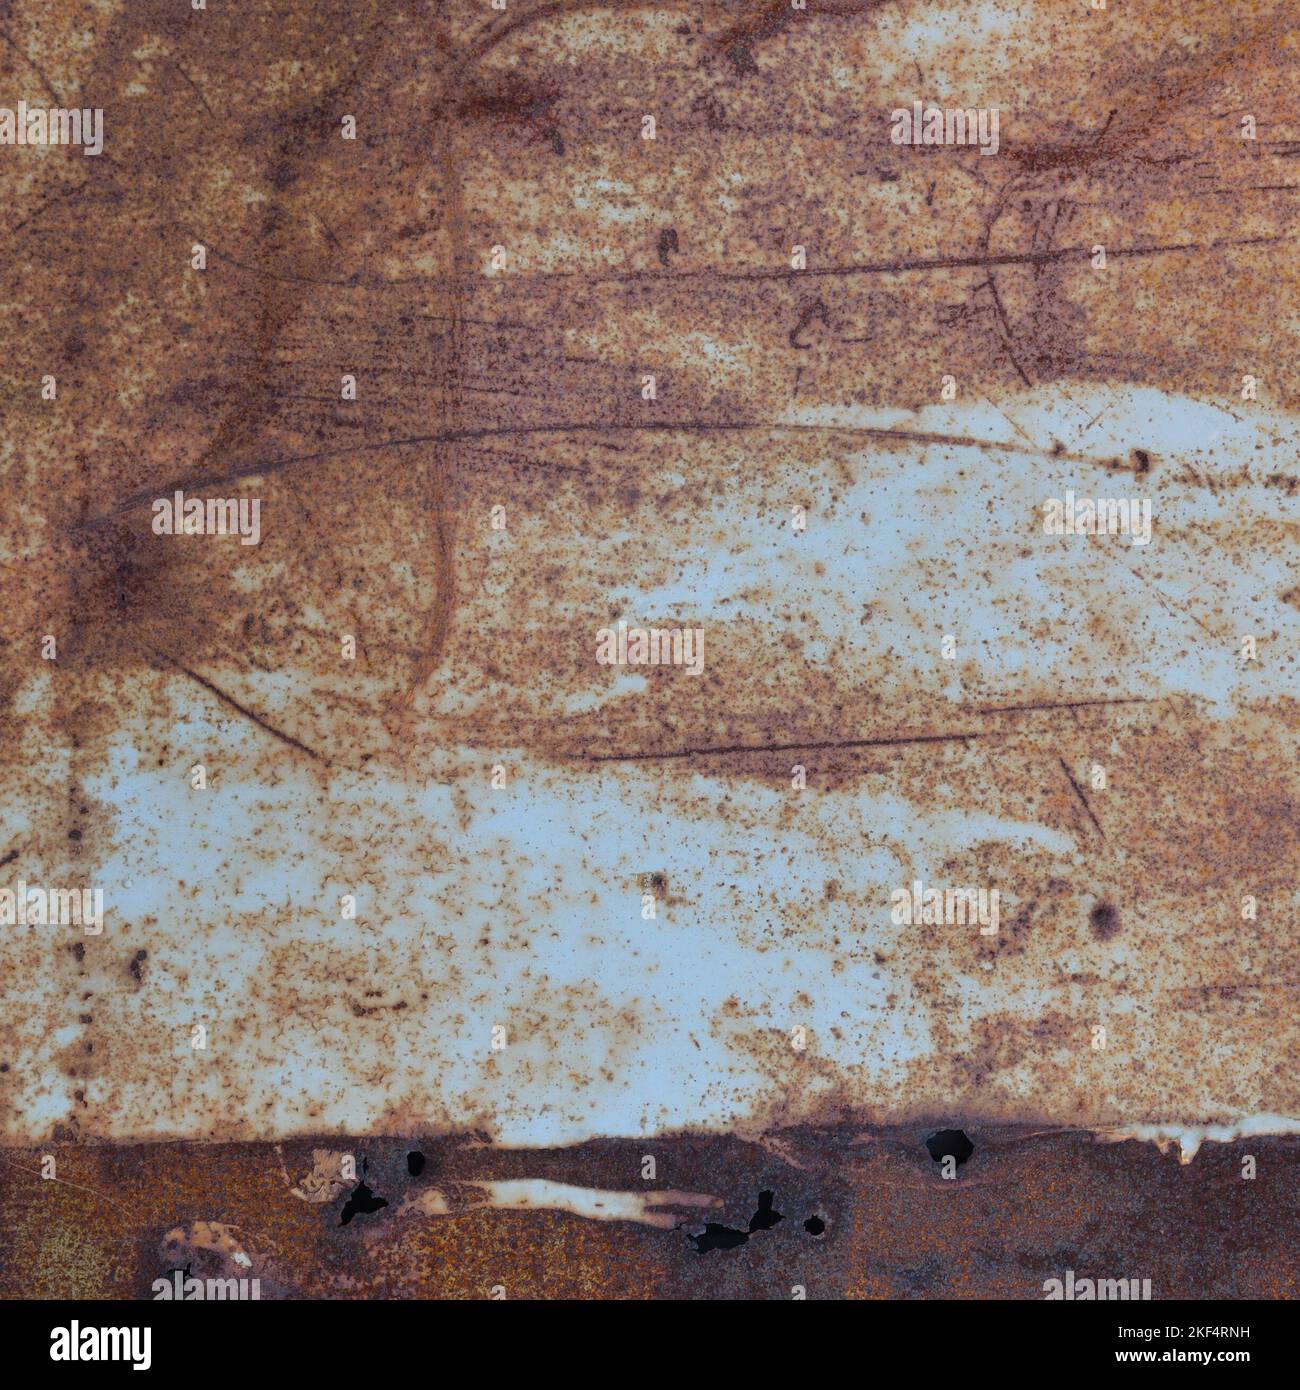 Old light blue painted grey rusty rustic rust iron metal frame background texture, horizontal aged damaged weathered scratched framed plain paint Stock Photo